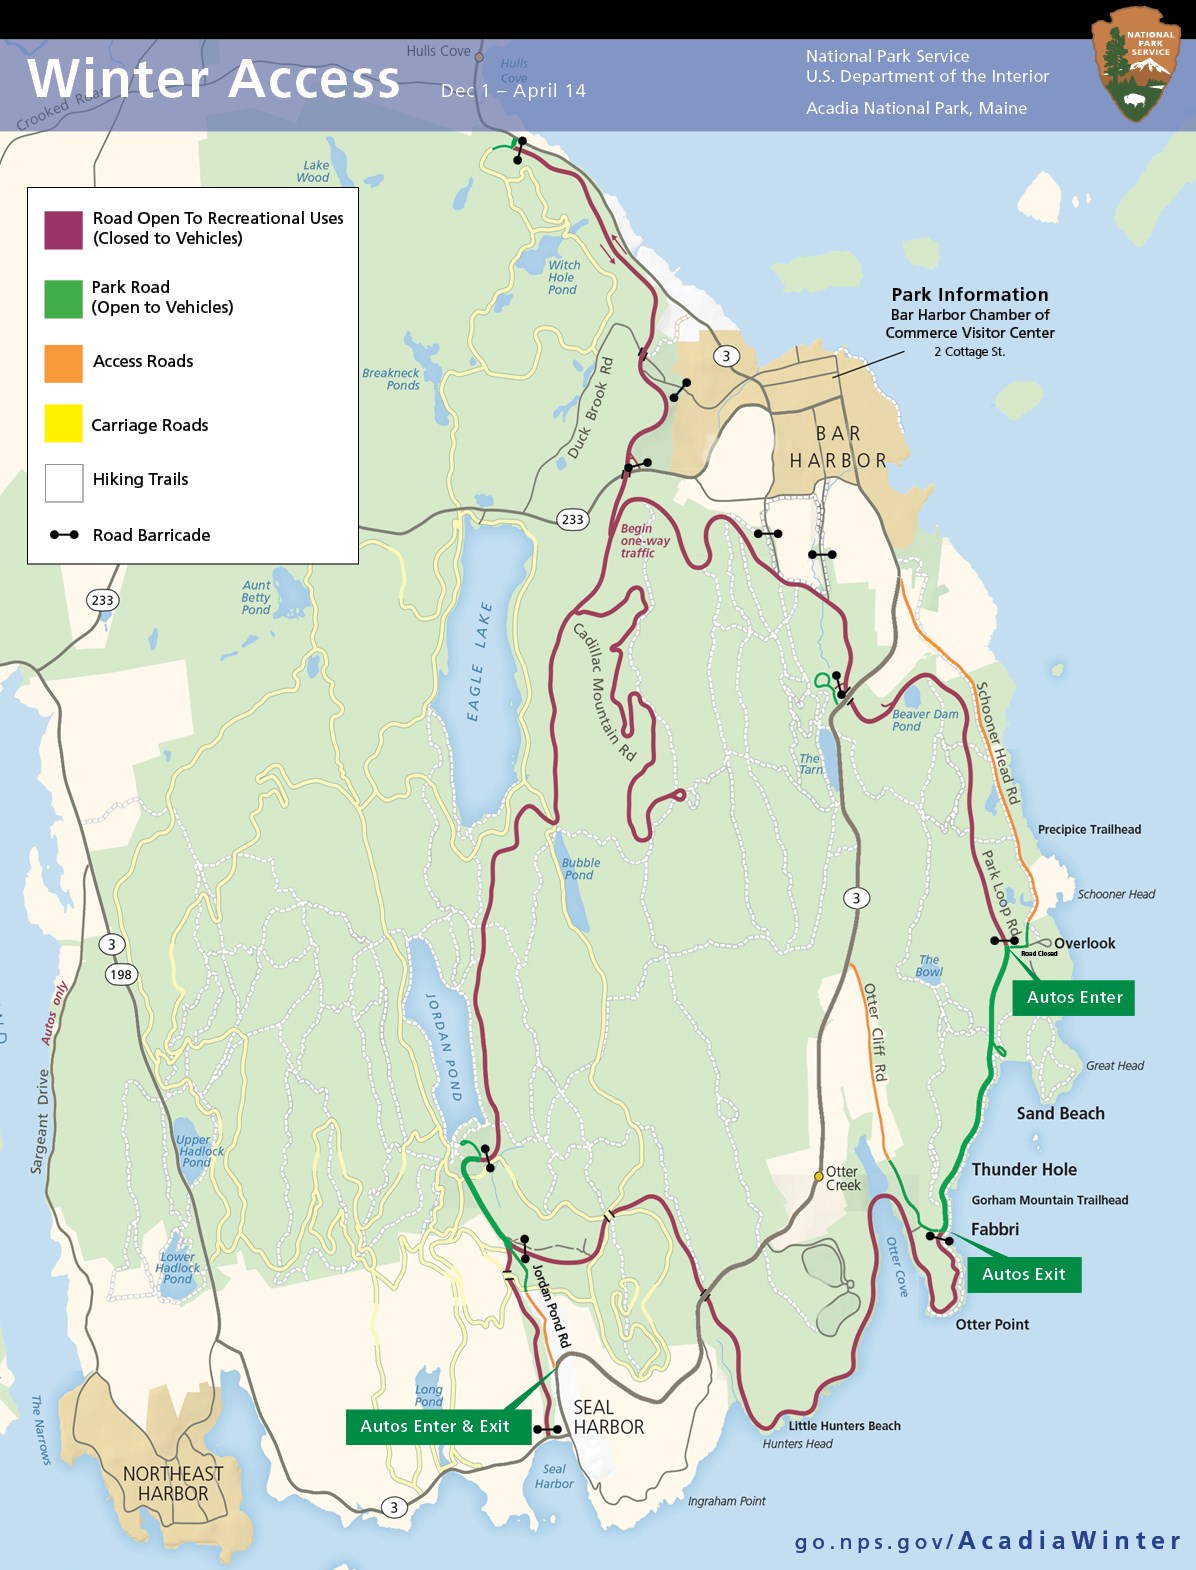 Map of roads to access portions of park open in winter